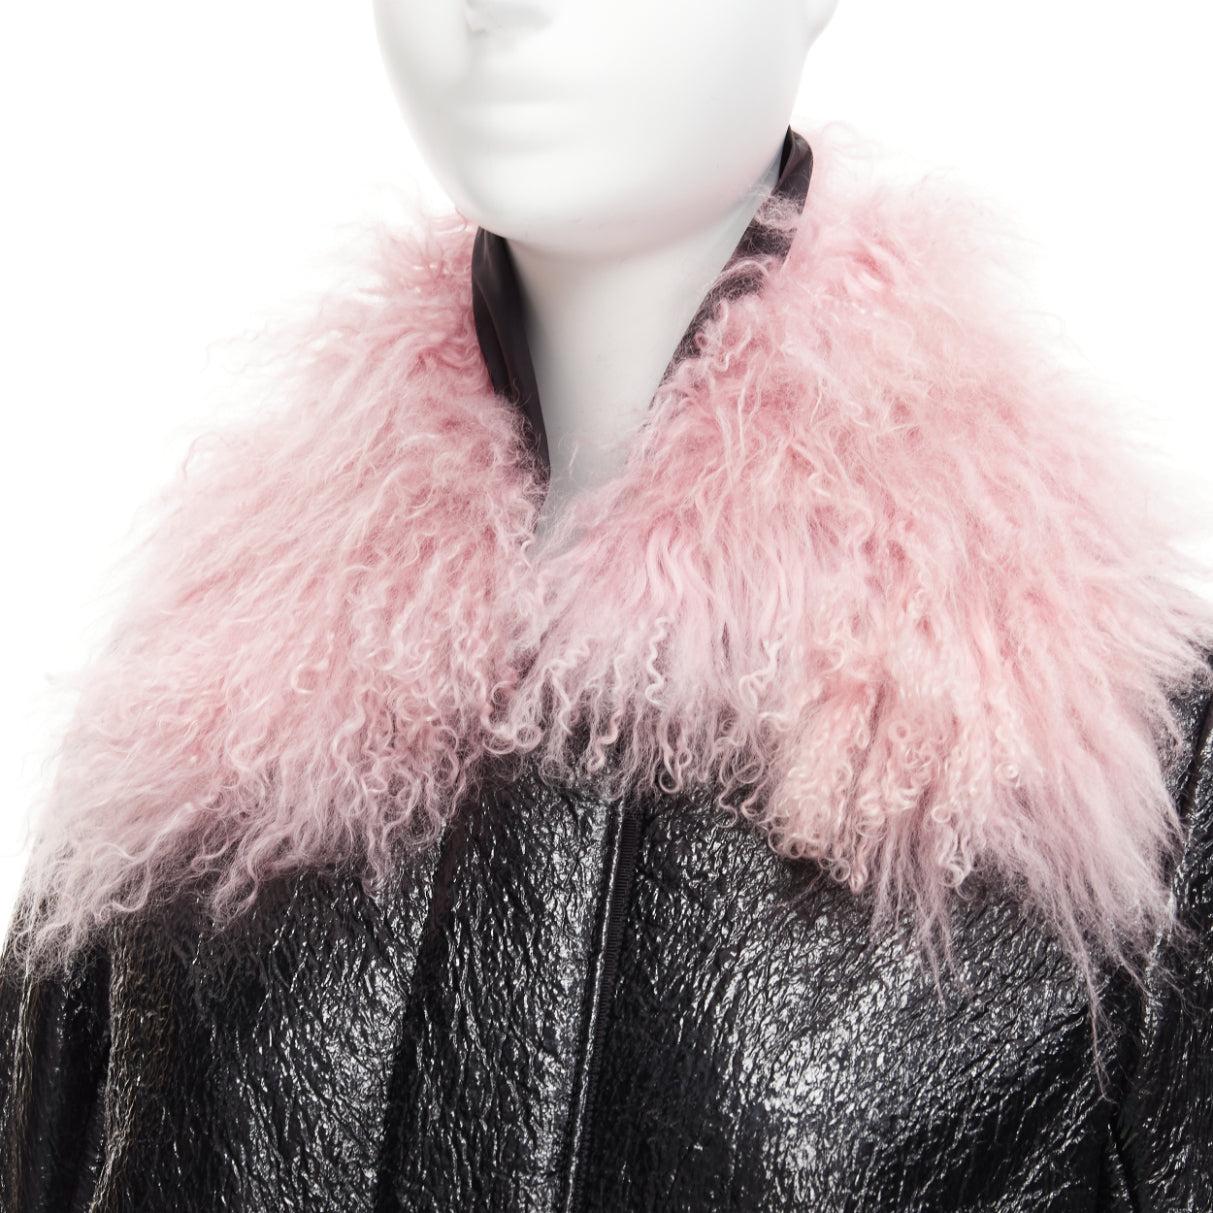 MONCLER pink tibet lamb fur black patent cotton virgin wool blend coat Sz1 M
Reference: NILI/A00009
Brand: Moncler
Material: Fur, Cotton, Blend
Color: Black, Pink
Pattern: Solid
Closure: Snap Buttons
Lining: Black Fabric
Extra Details: Goose down